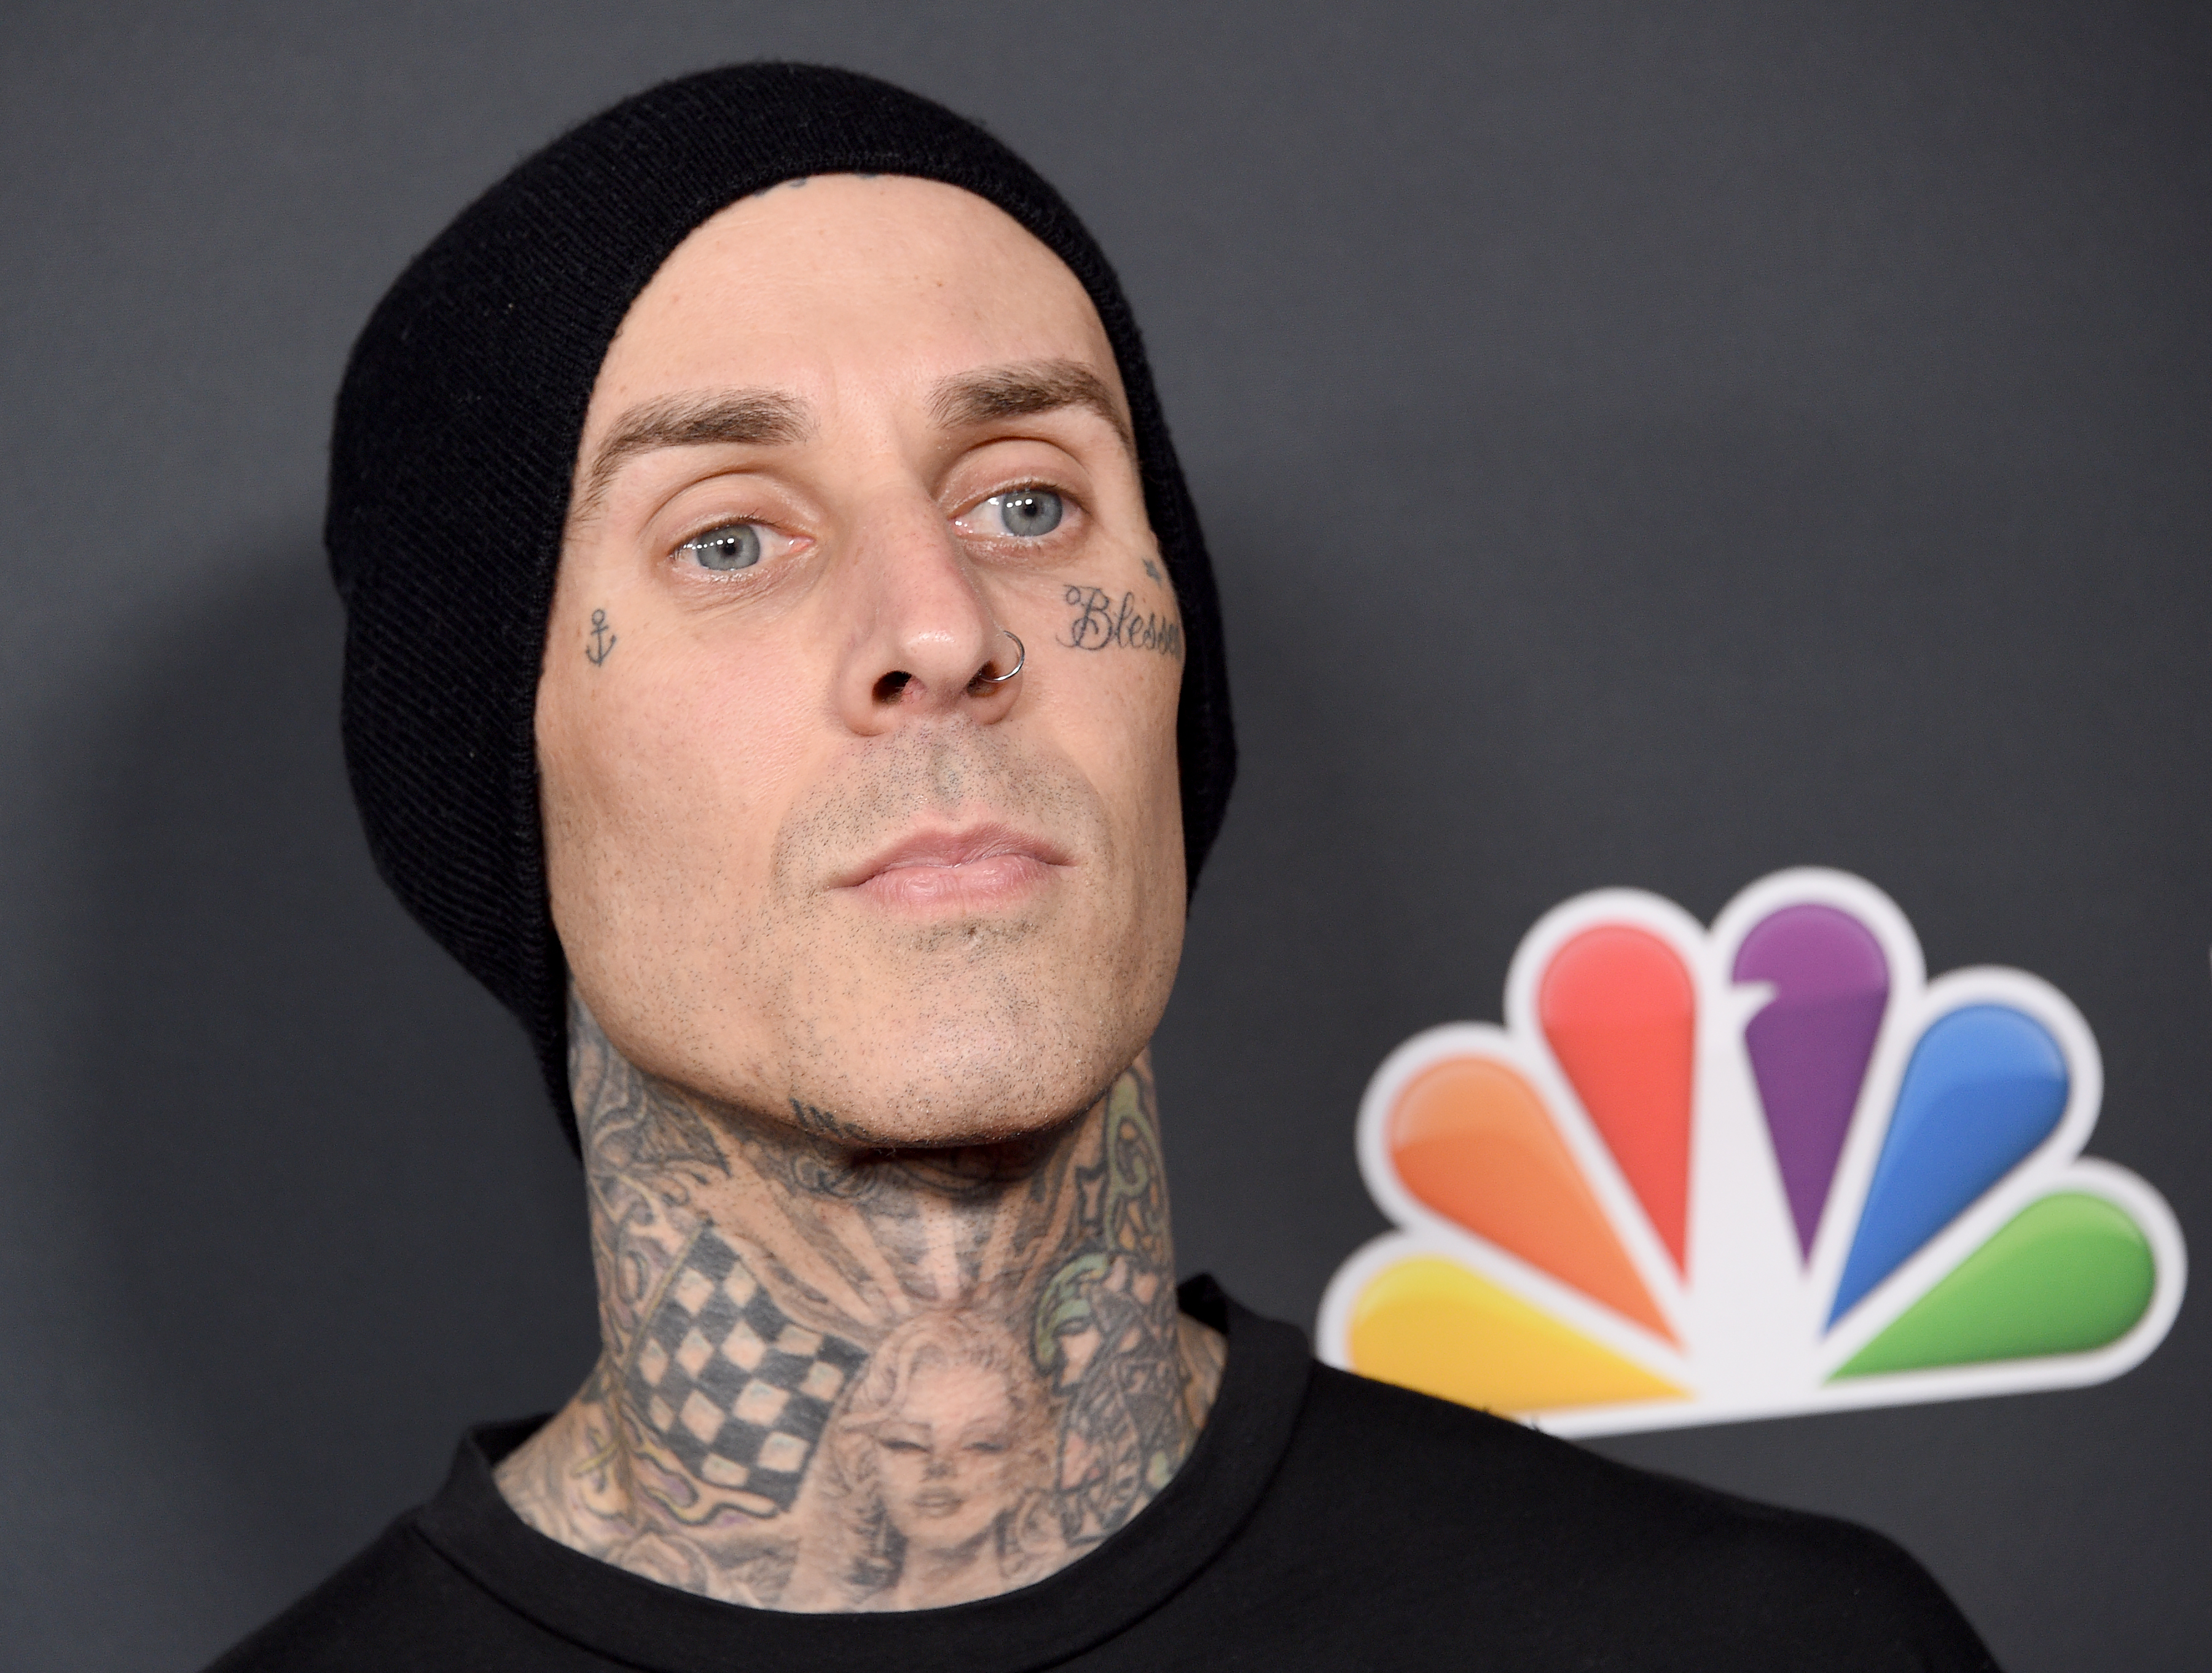 Close-up of Travis wearing a beanie at a media event